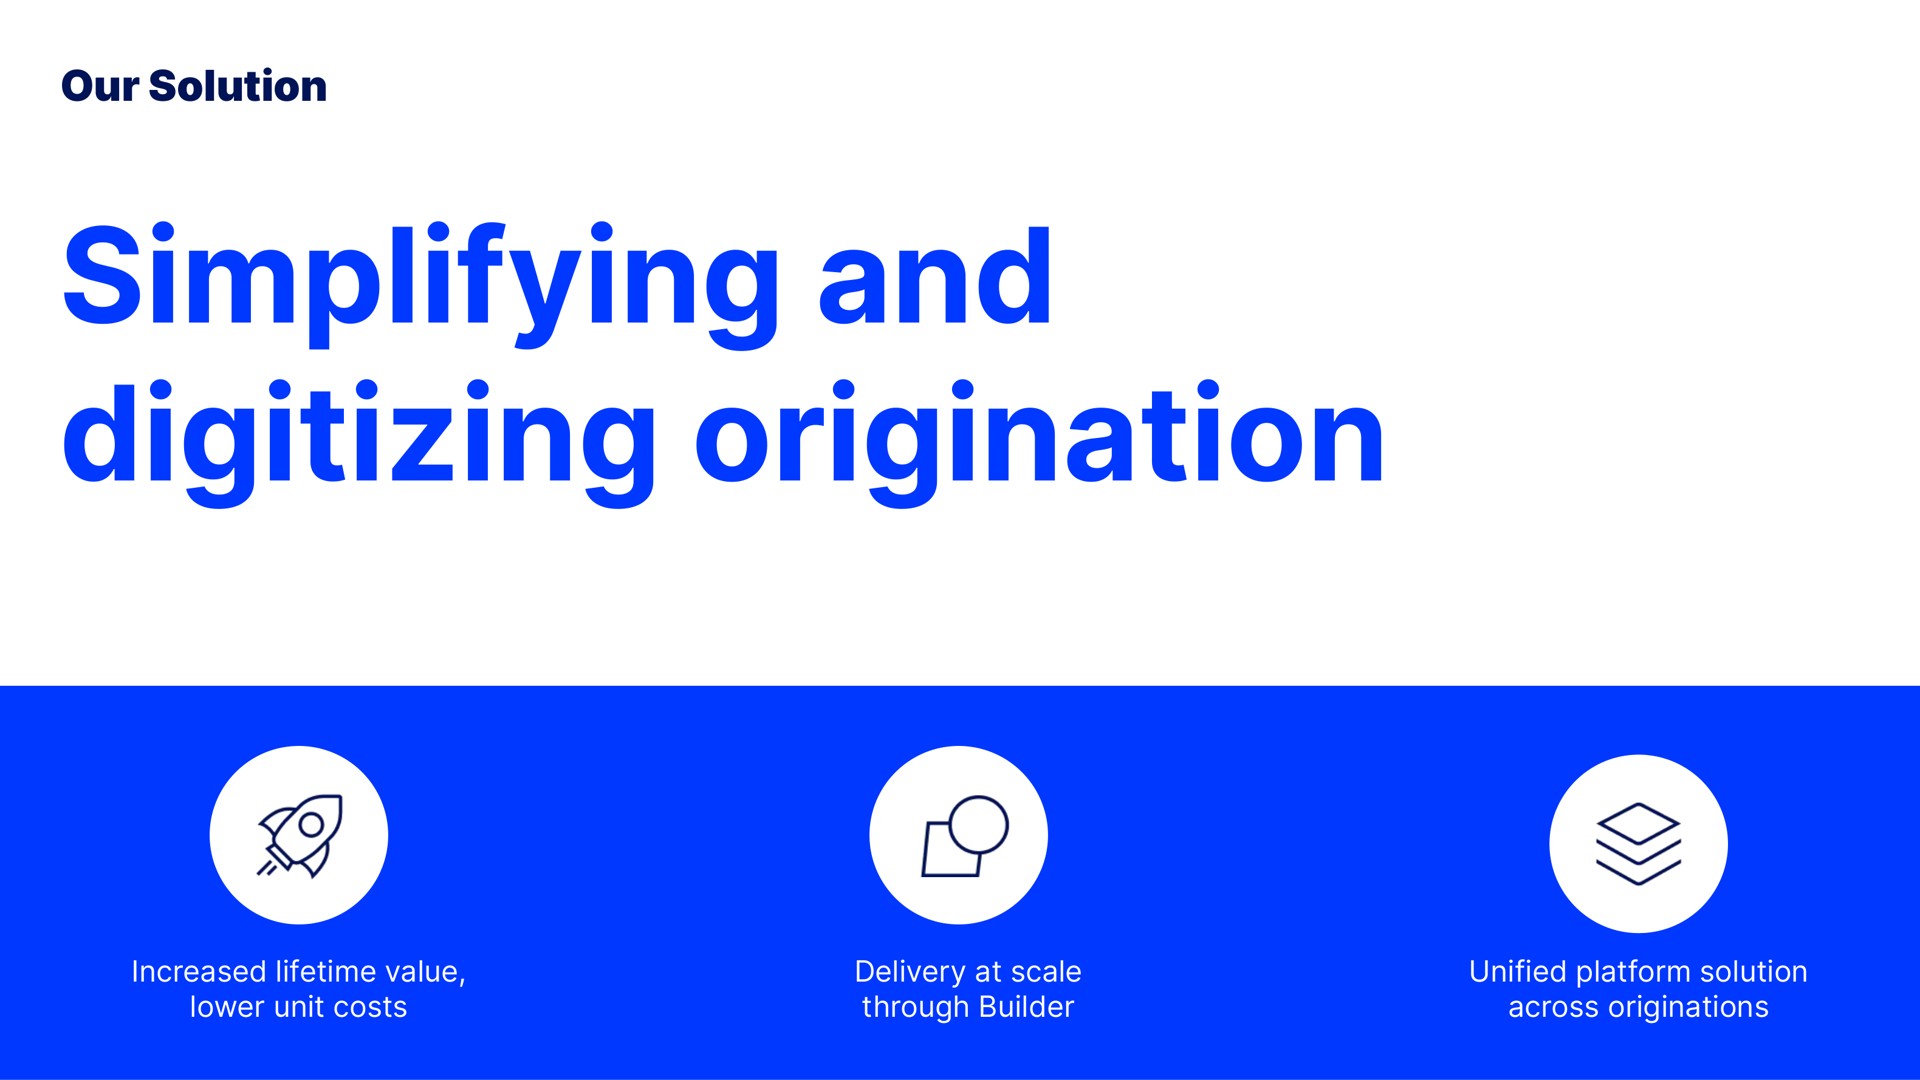 our solution simplifying and digitizing origination increased lifetime value lower unit costs delivery at scale through builder unified platform solution across originations | Blend